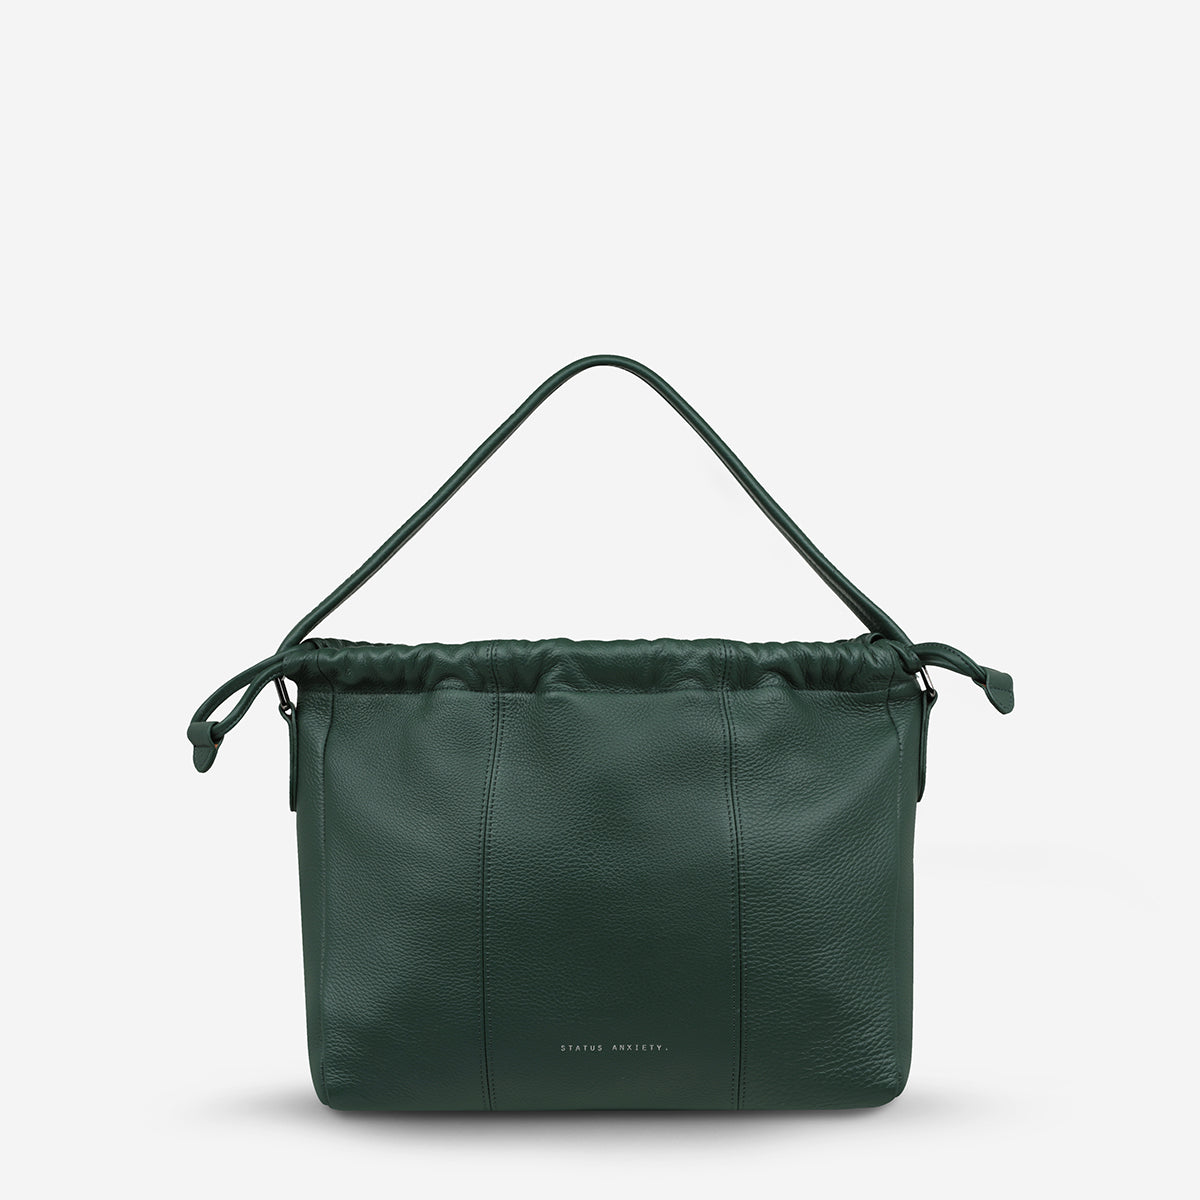 Point Of No Return Women's Green Leather Bag | Status Anxiety®